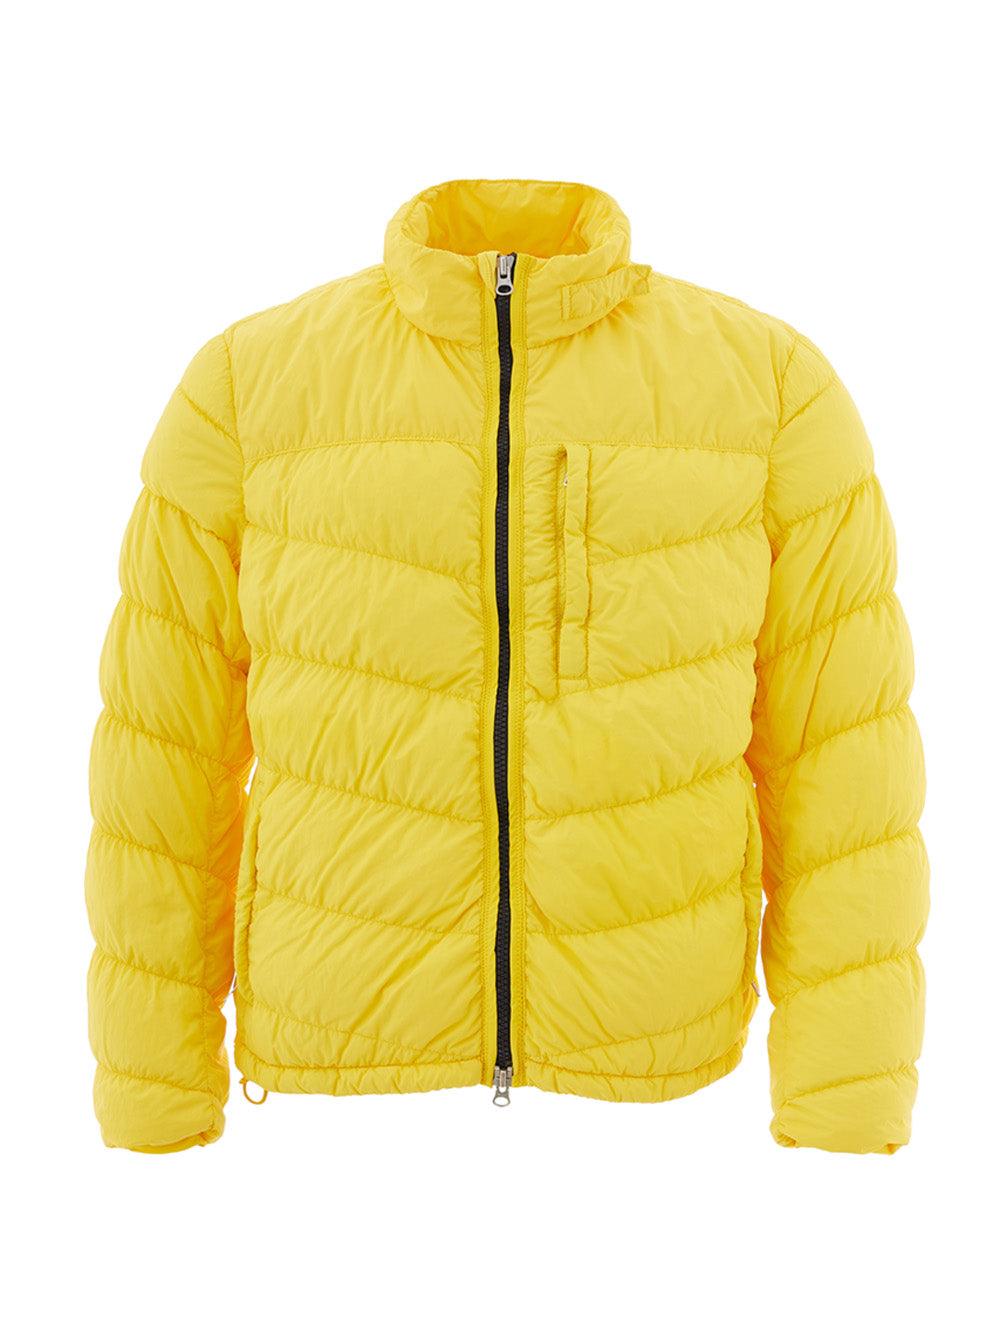 Woolrich Yellow Quilted Jacket - Ellie Belle